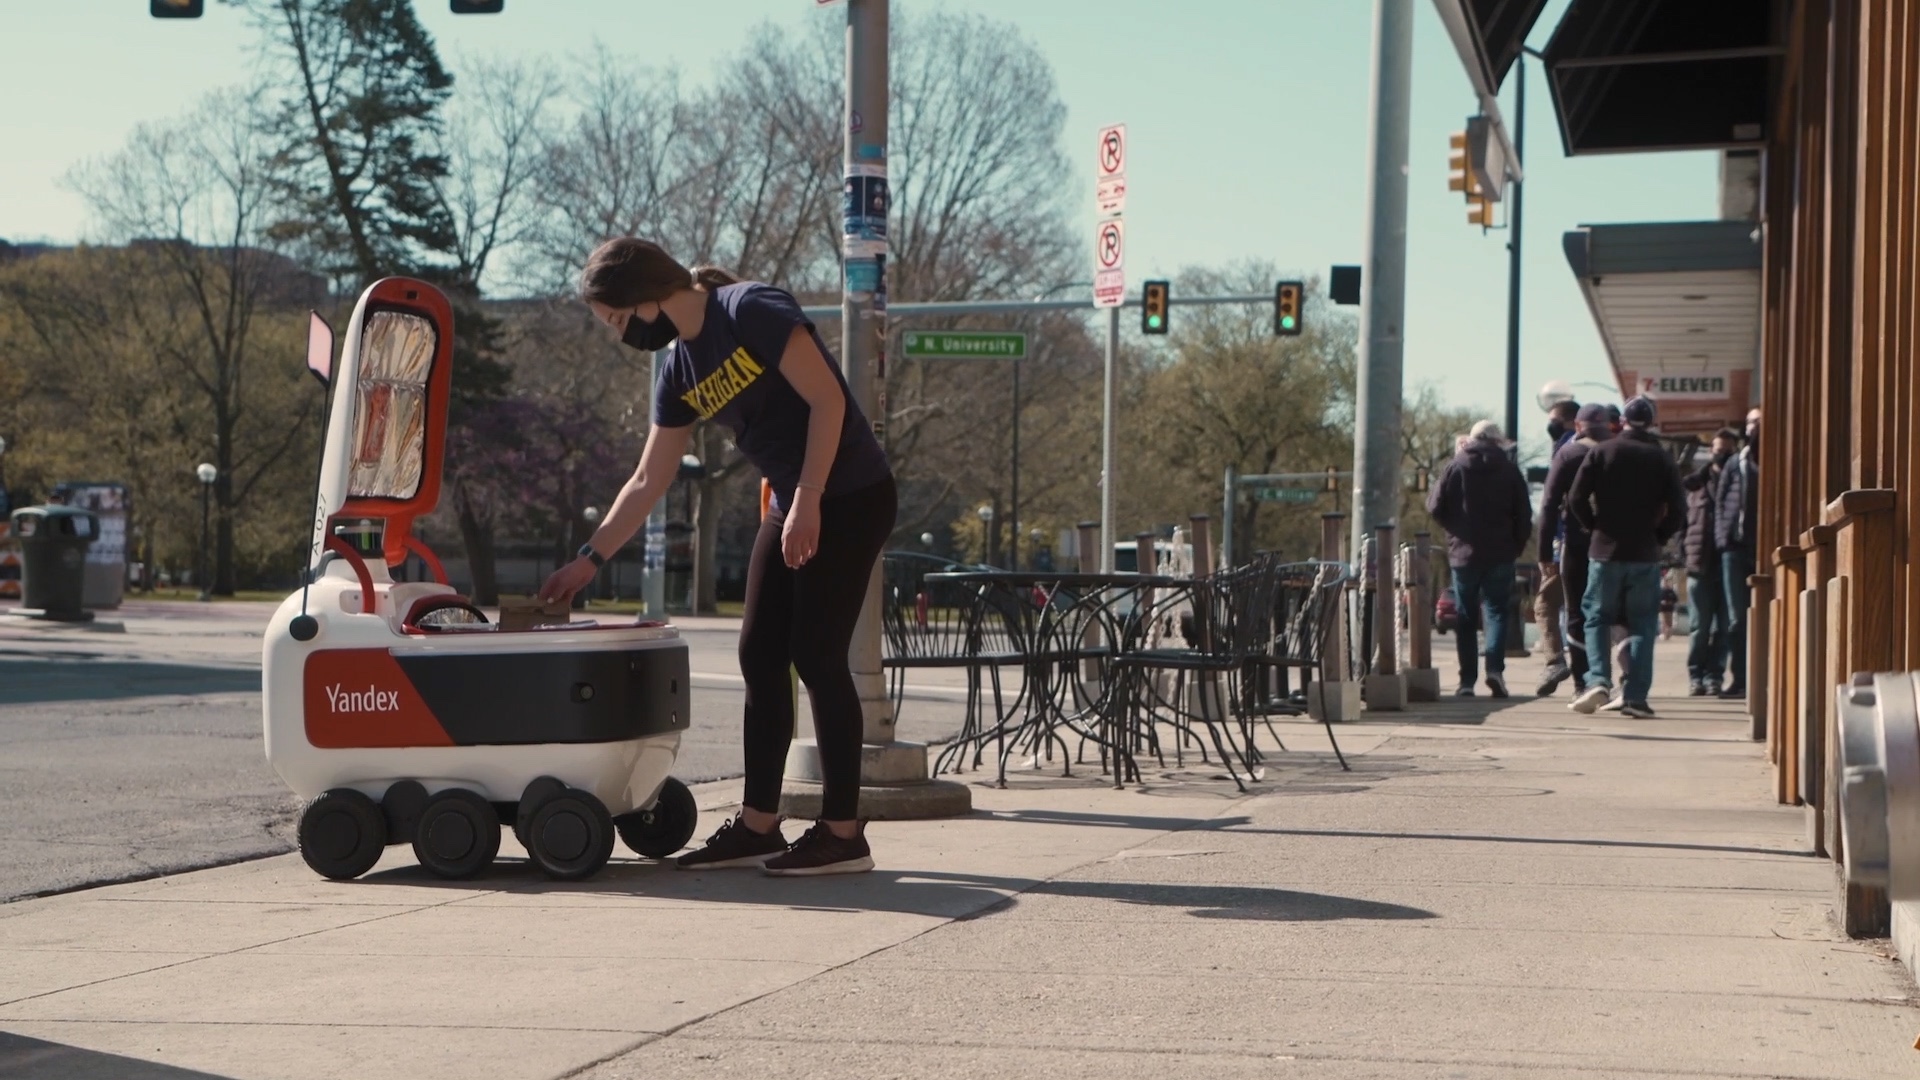 Yandex Self-Driving Group partners with GrubHub to bring robotic delivery to college campuses